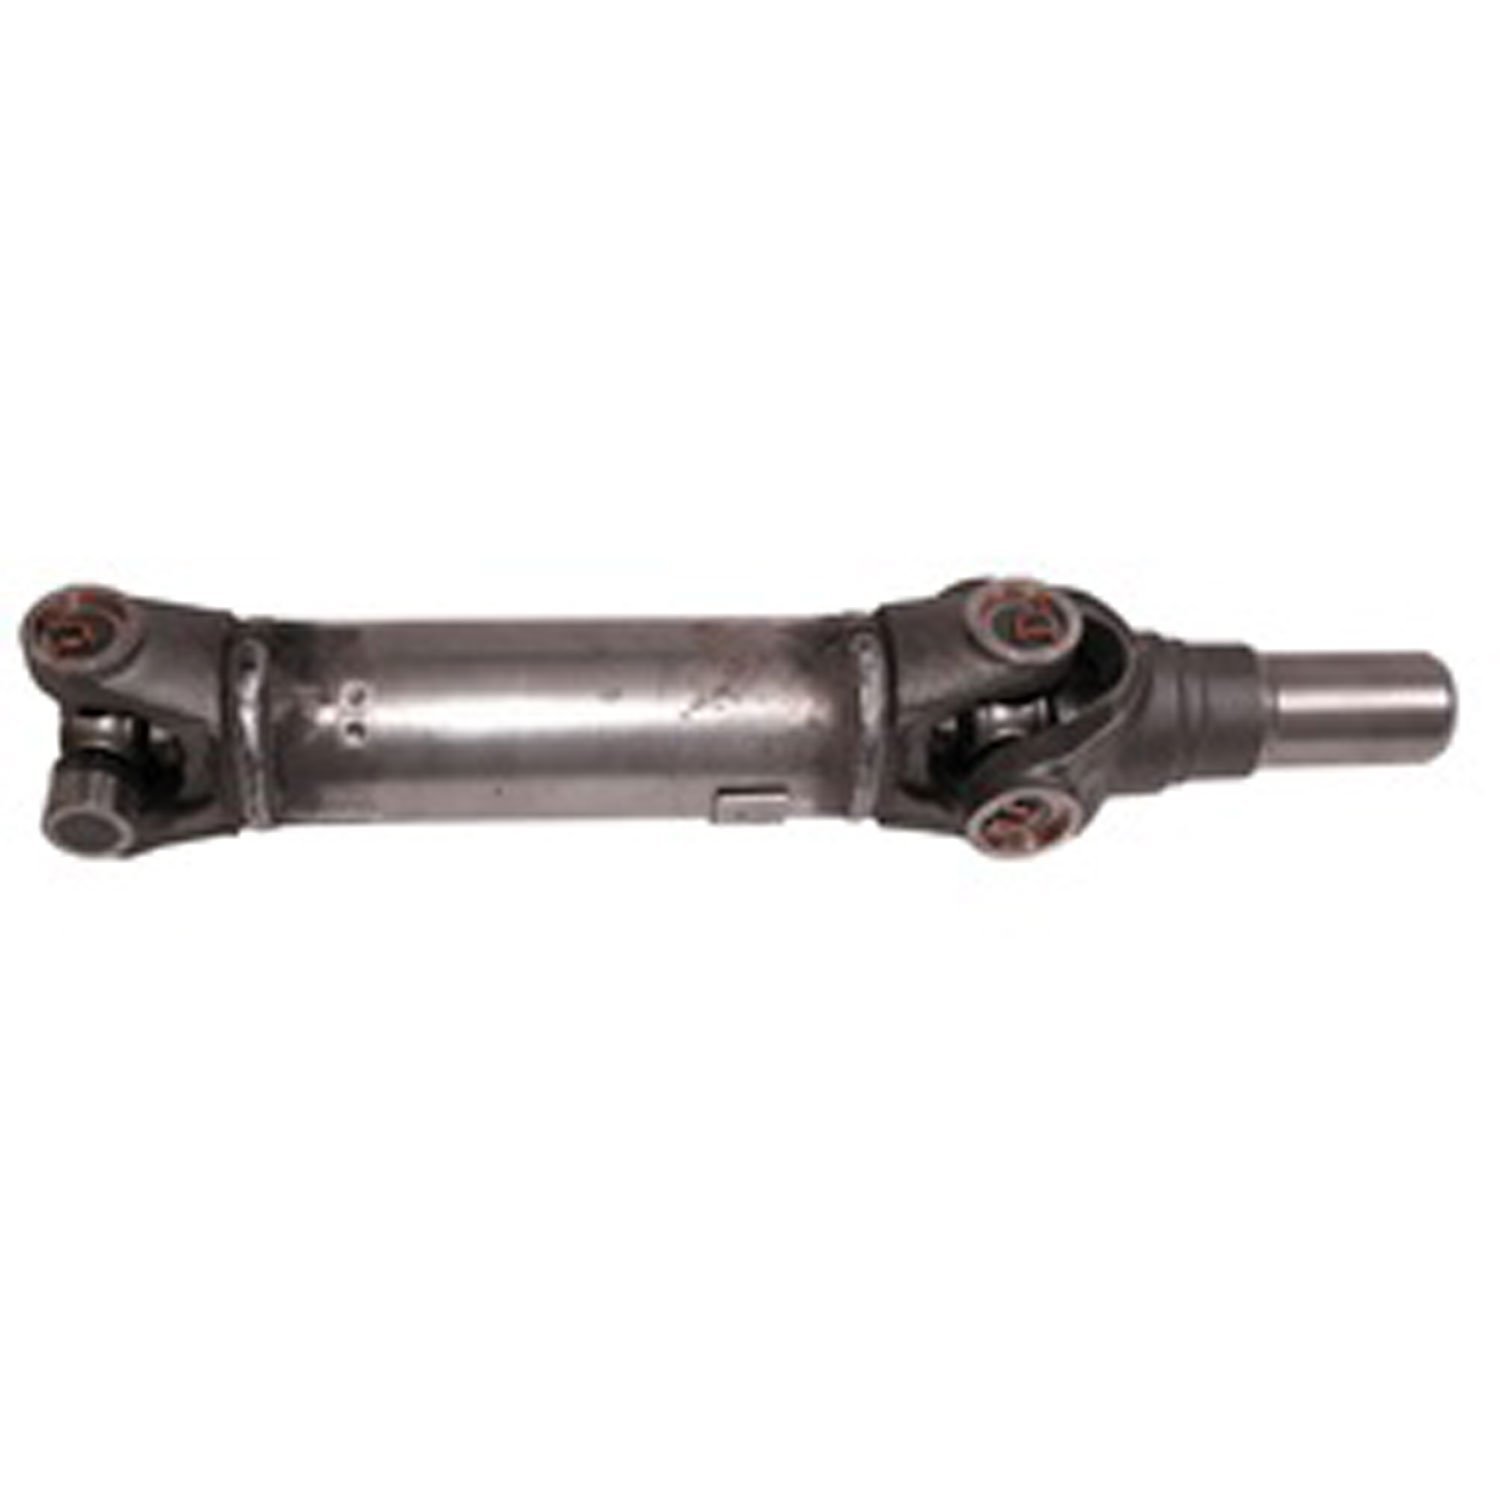 Replacement Rear Driveshaft for 2001-2006 Jeep Wrangler